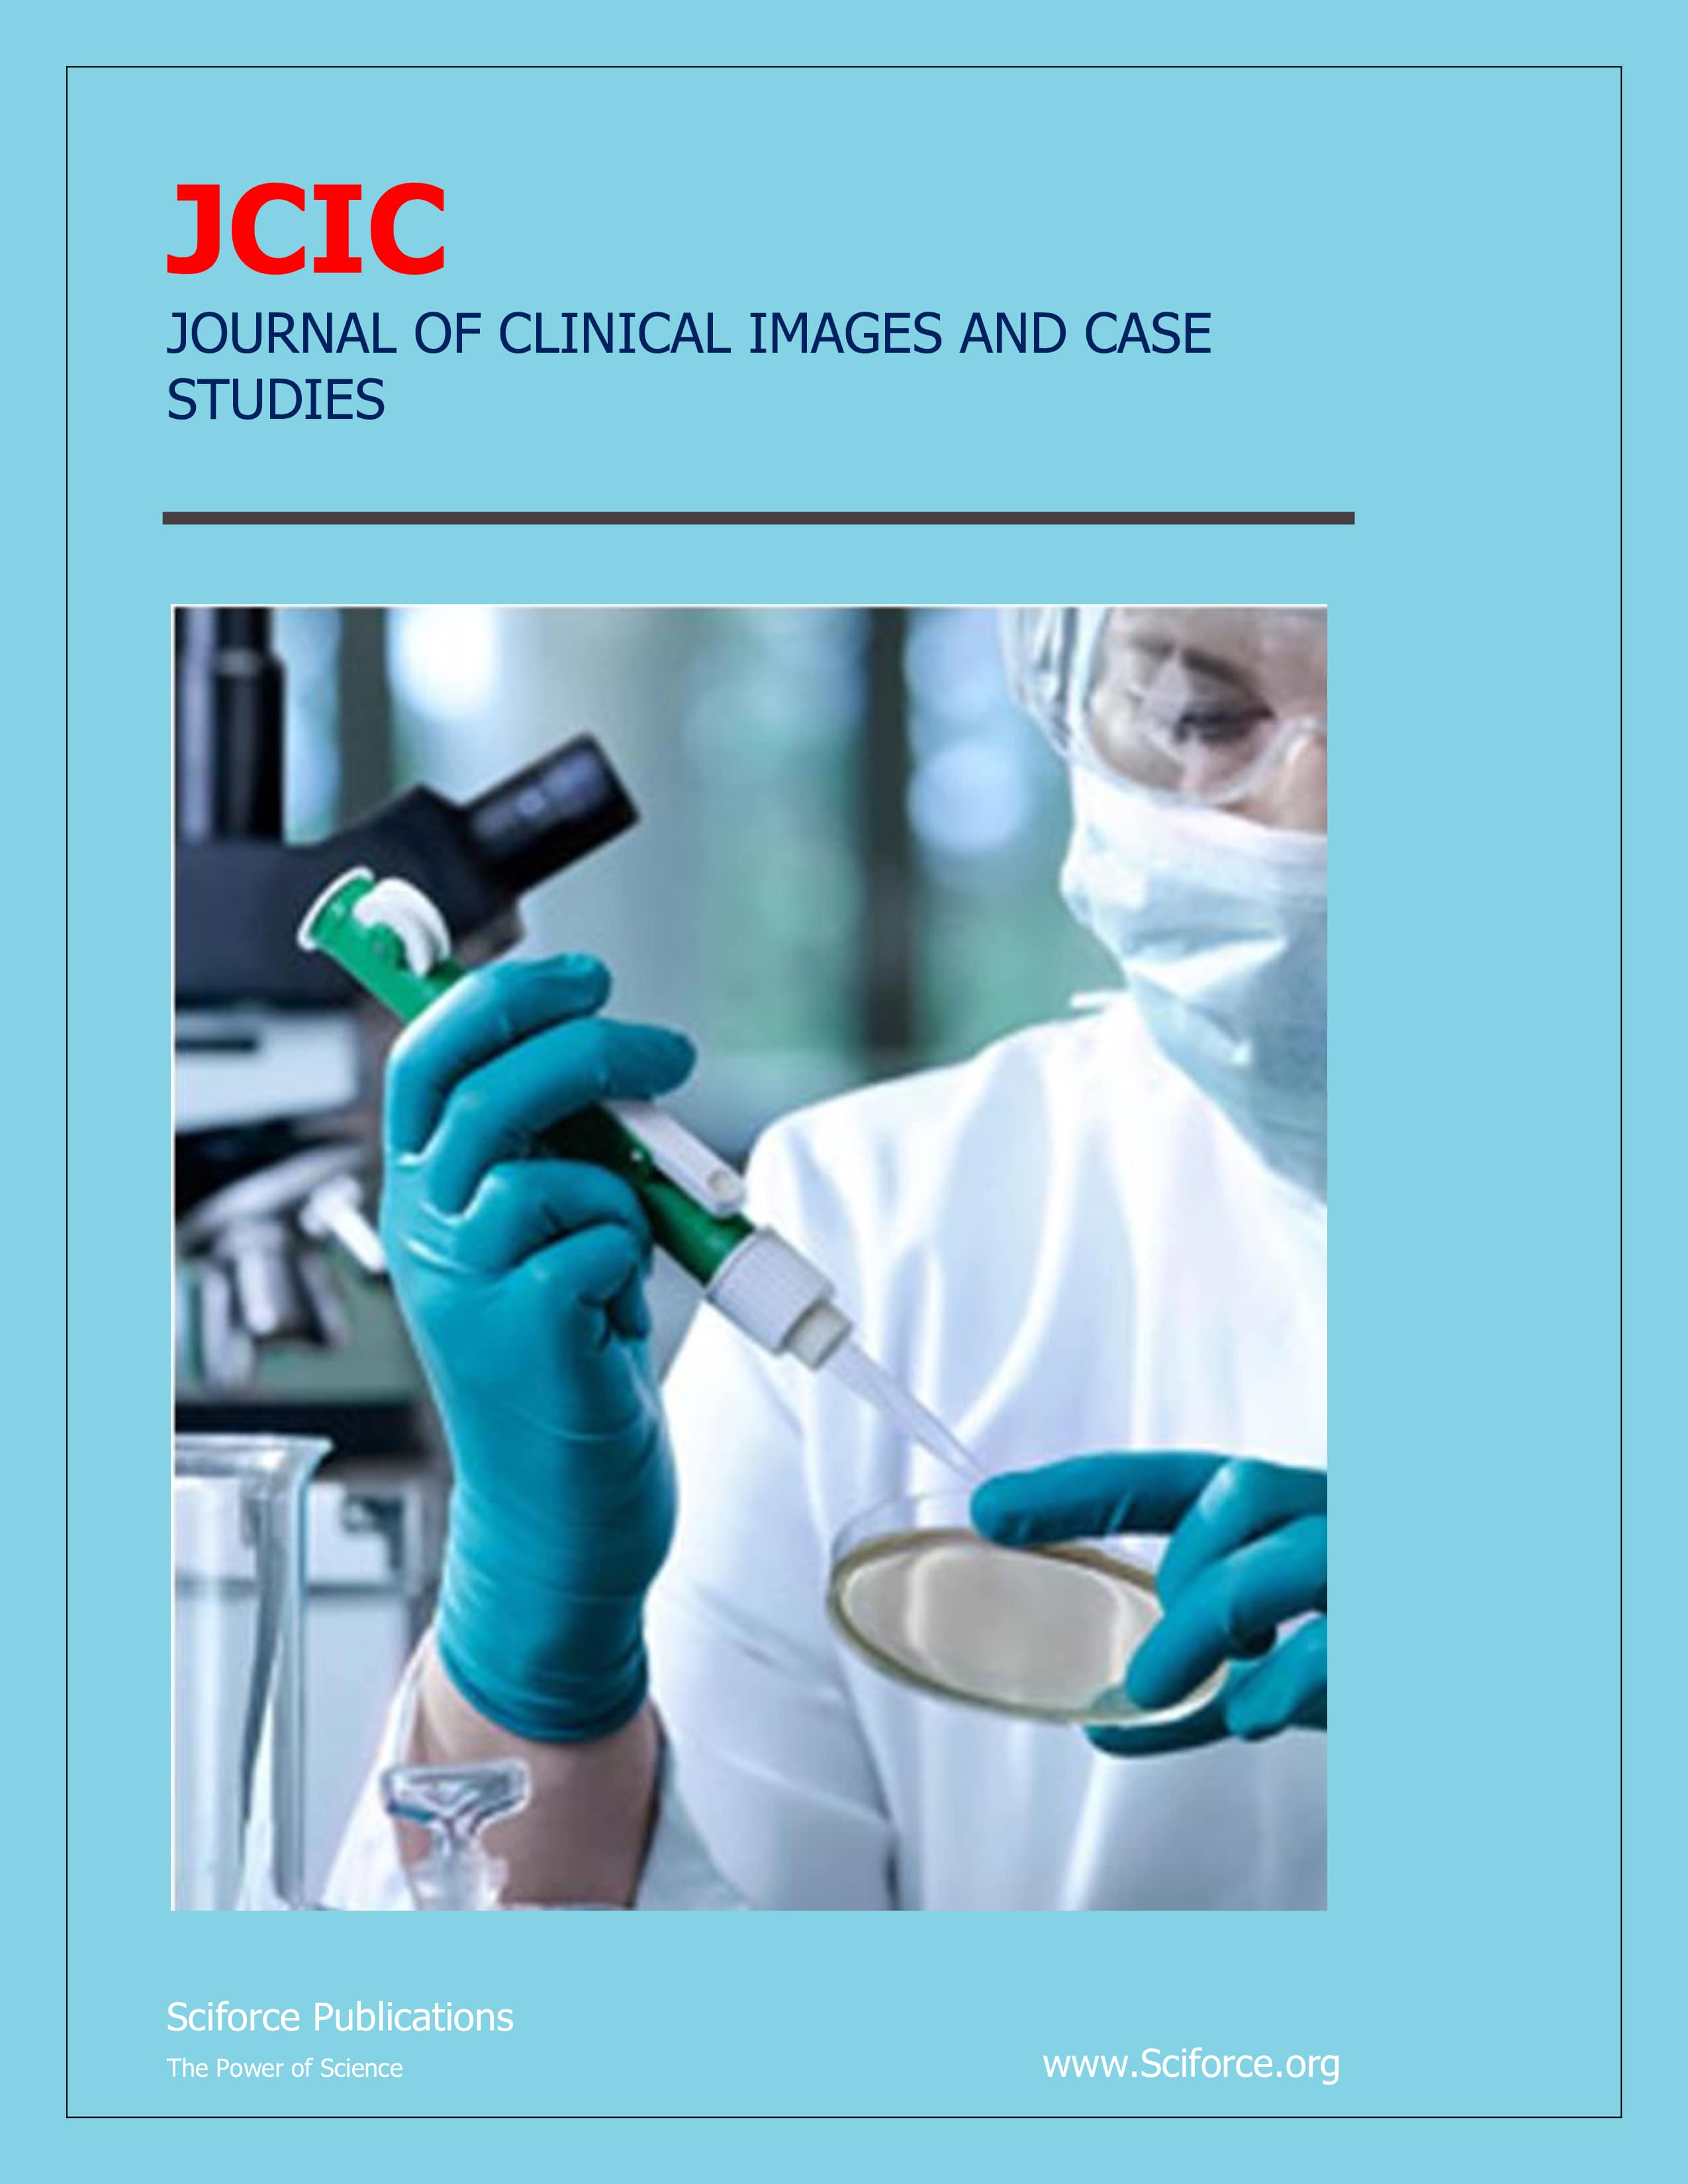 Journal of Clinical Images and Case Studies